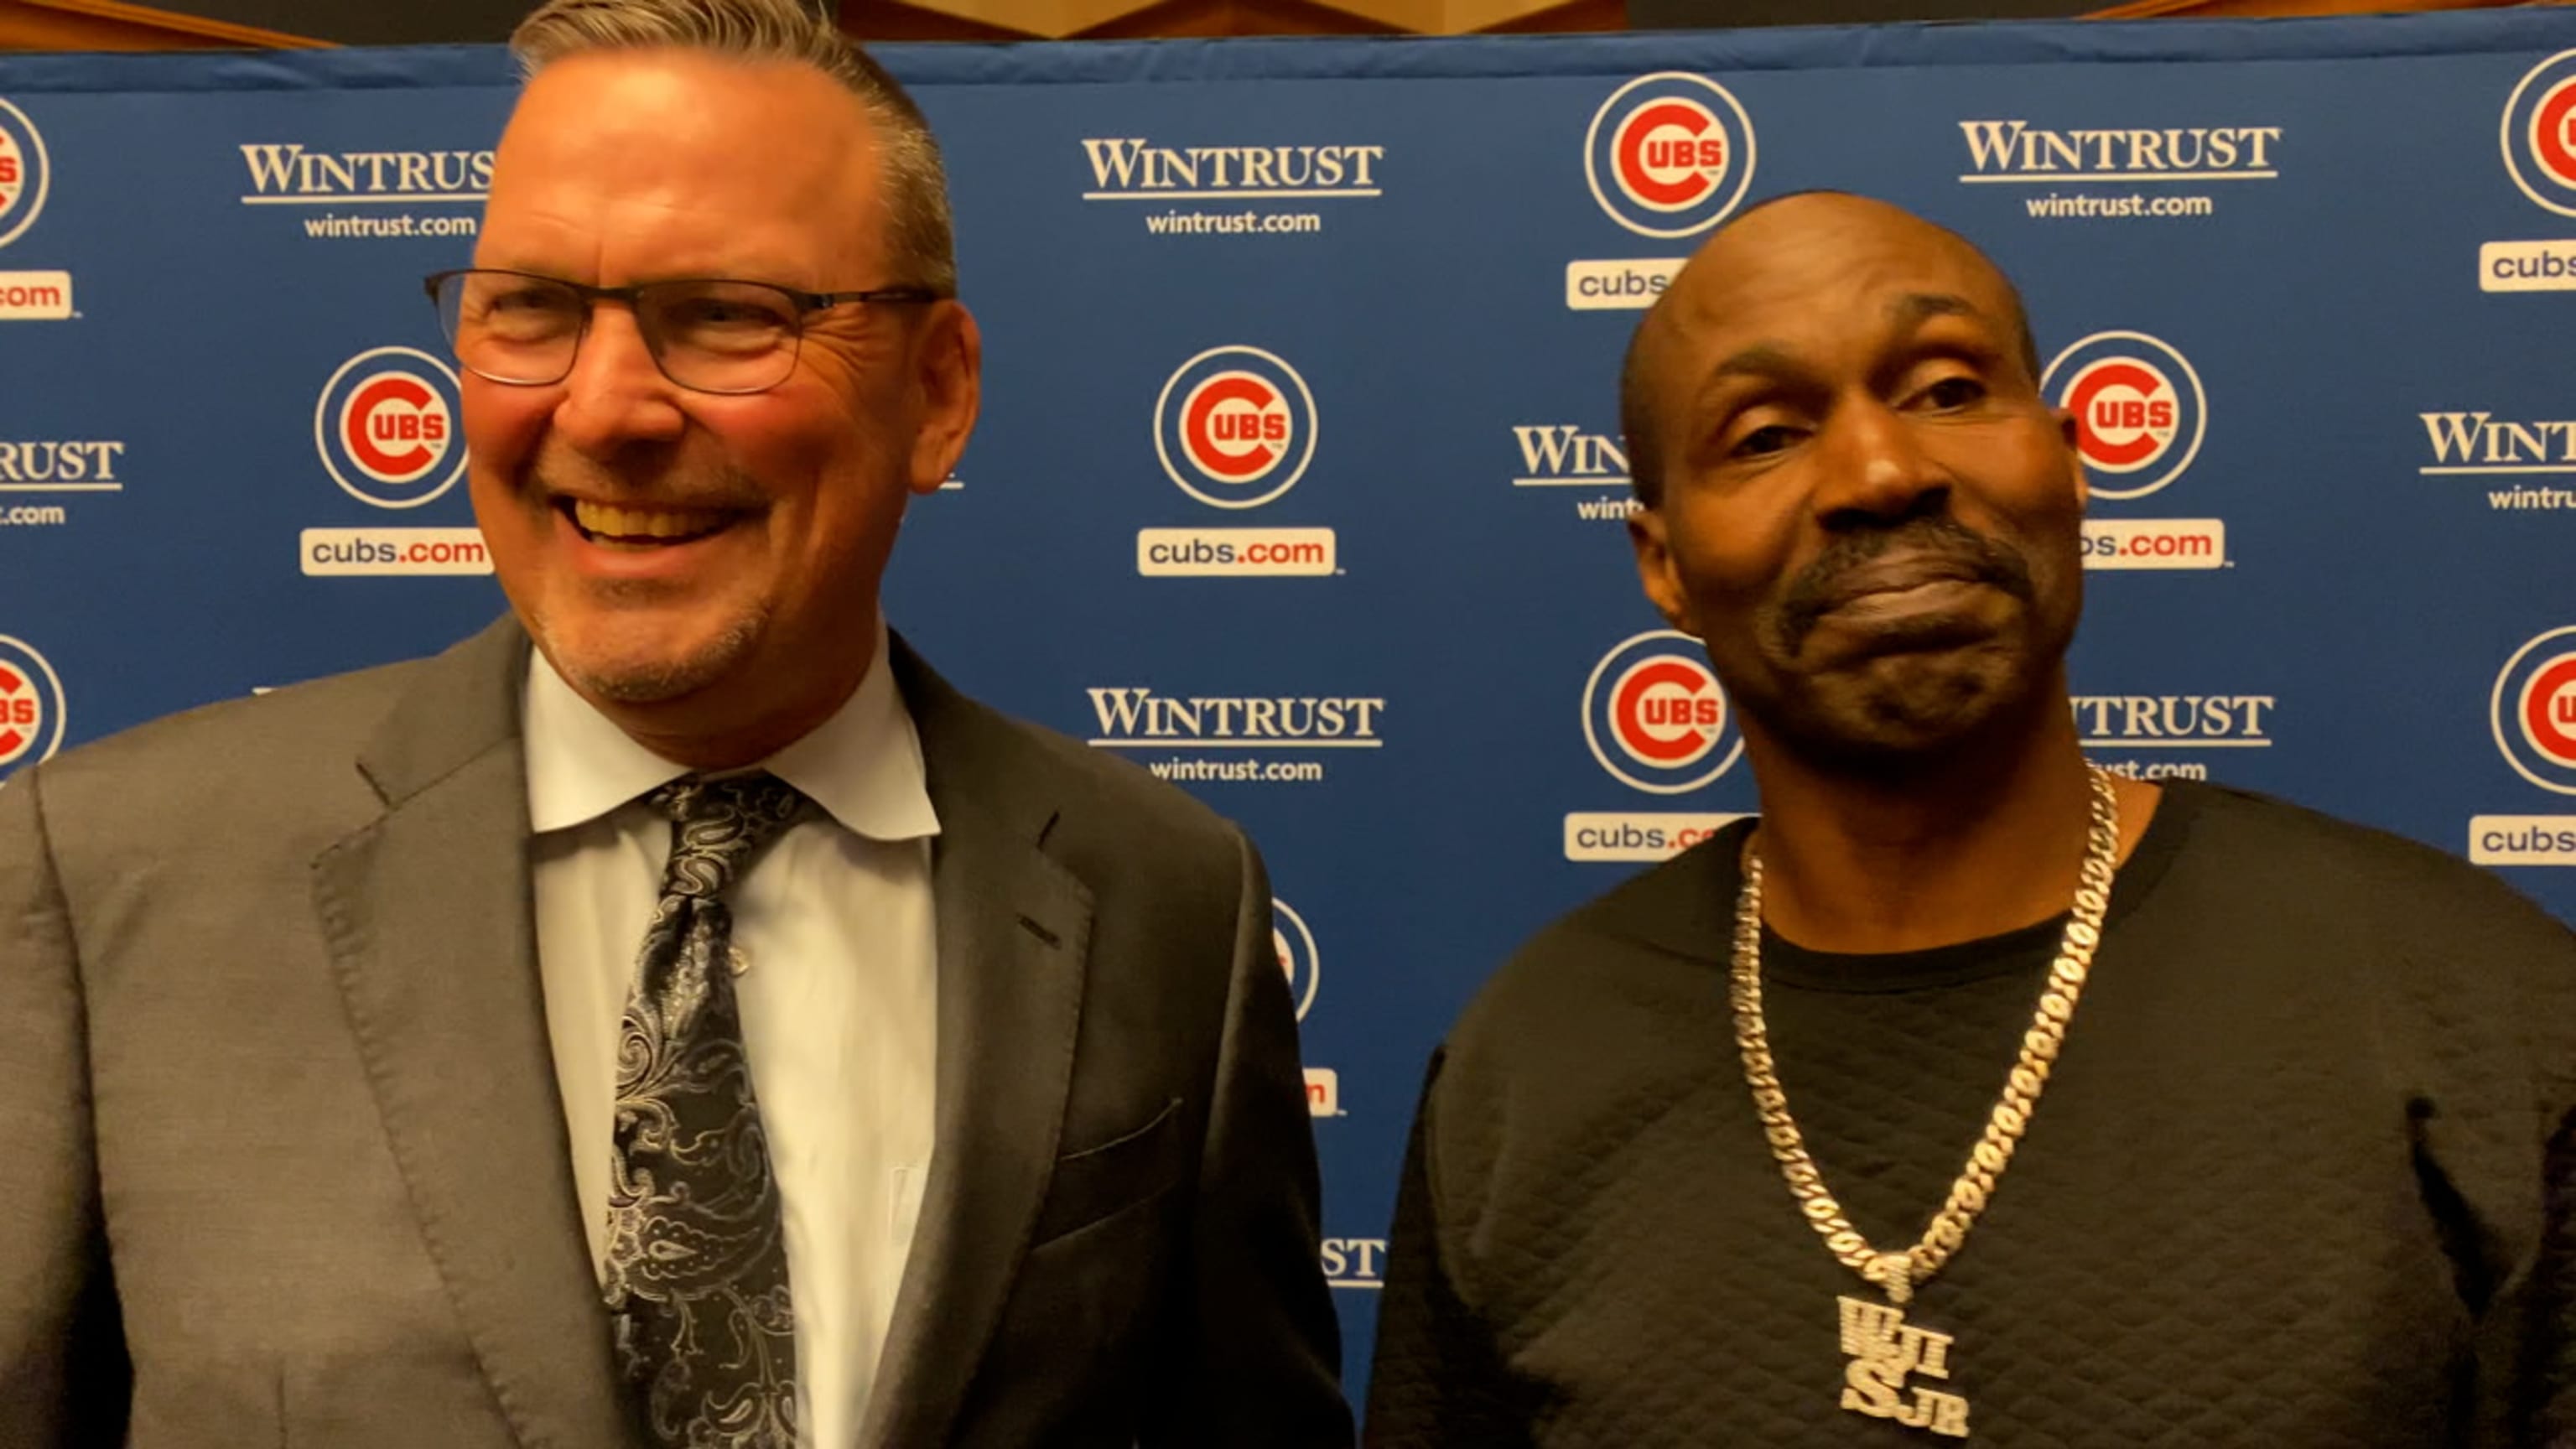 Members of the Chicago Cubs Baseball Hall of Fame Shawon Dunston and  News Photo - Getty Images